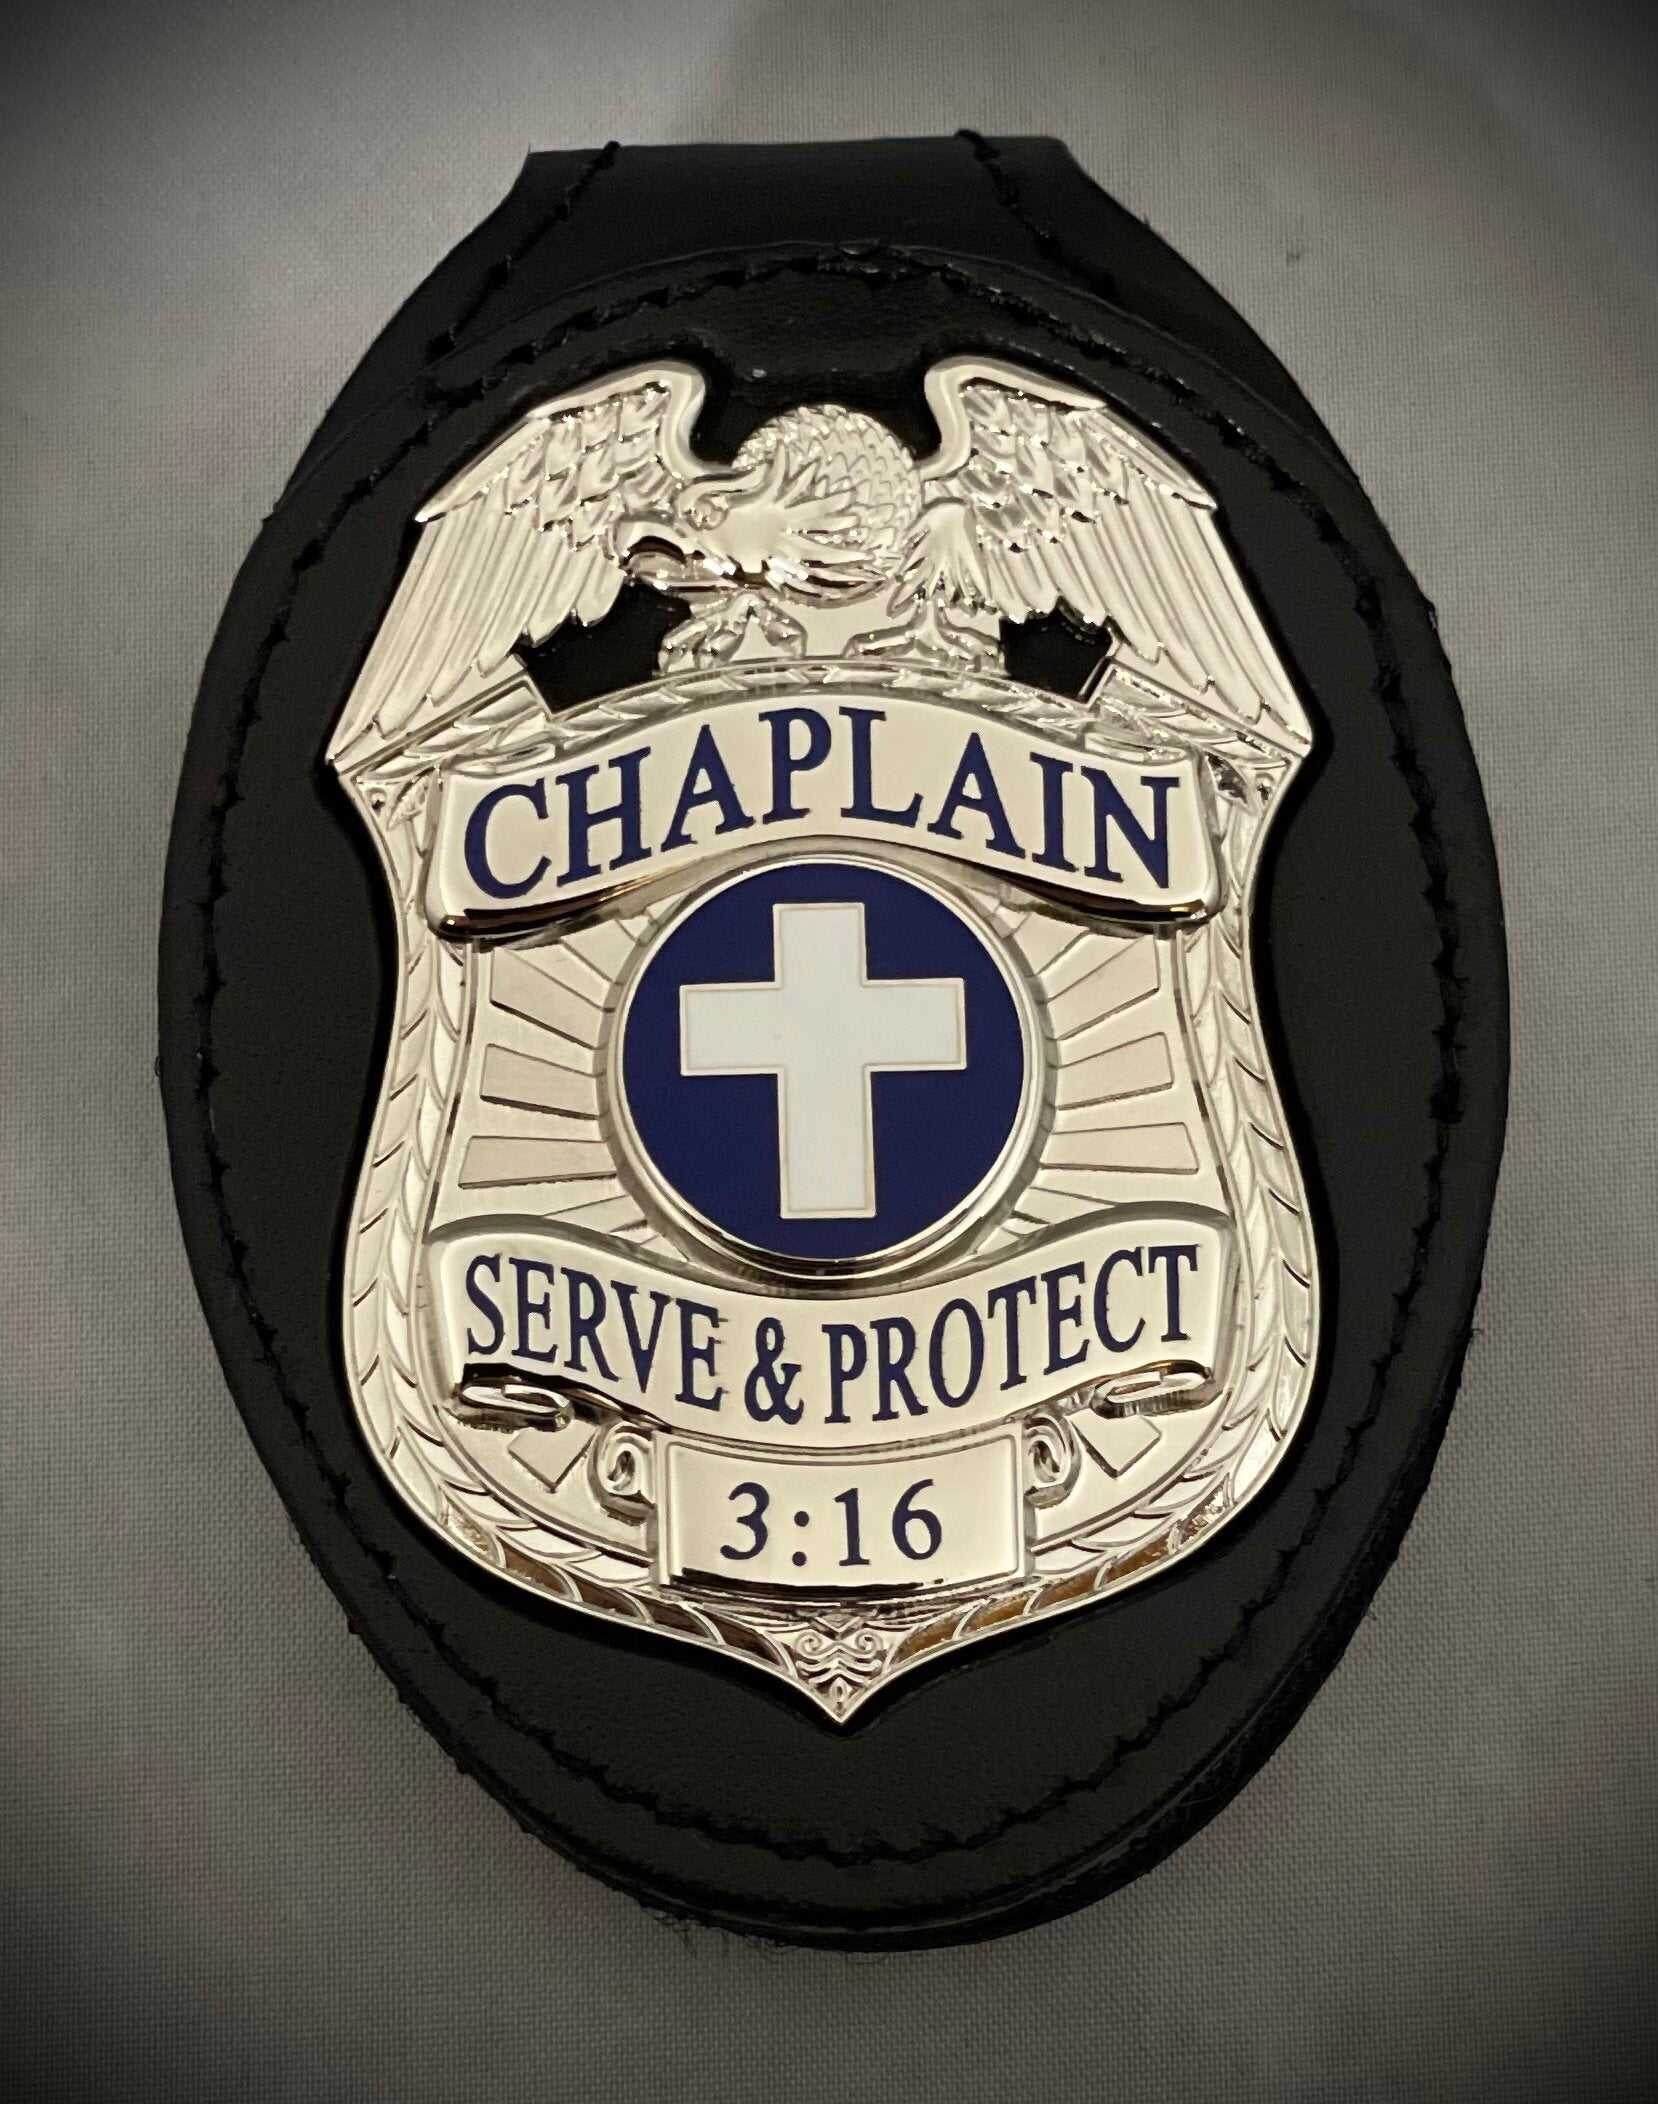 Chaplain Serve and Protect Silver Badge with Black leather belt clip holder